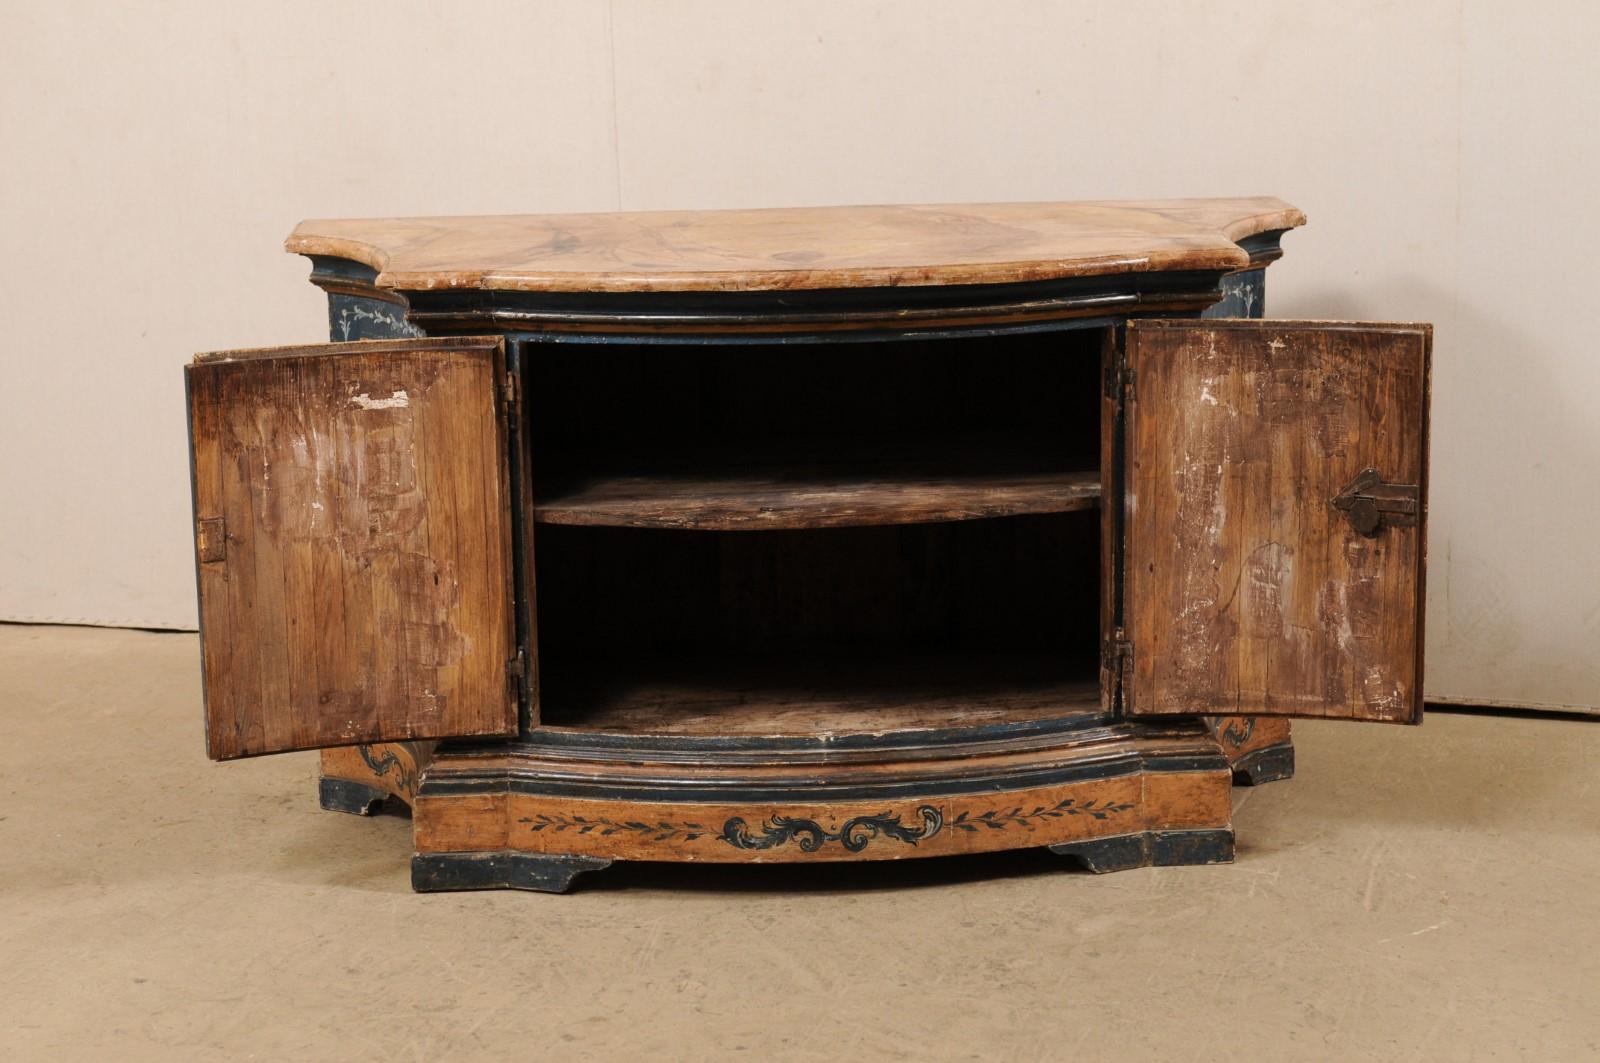 19th Century Italian Buffet Console with Curvy Shape and Ornate Rococo Painted Finish For Sale